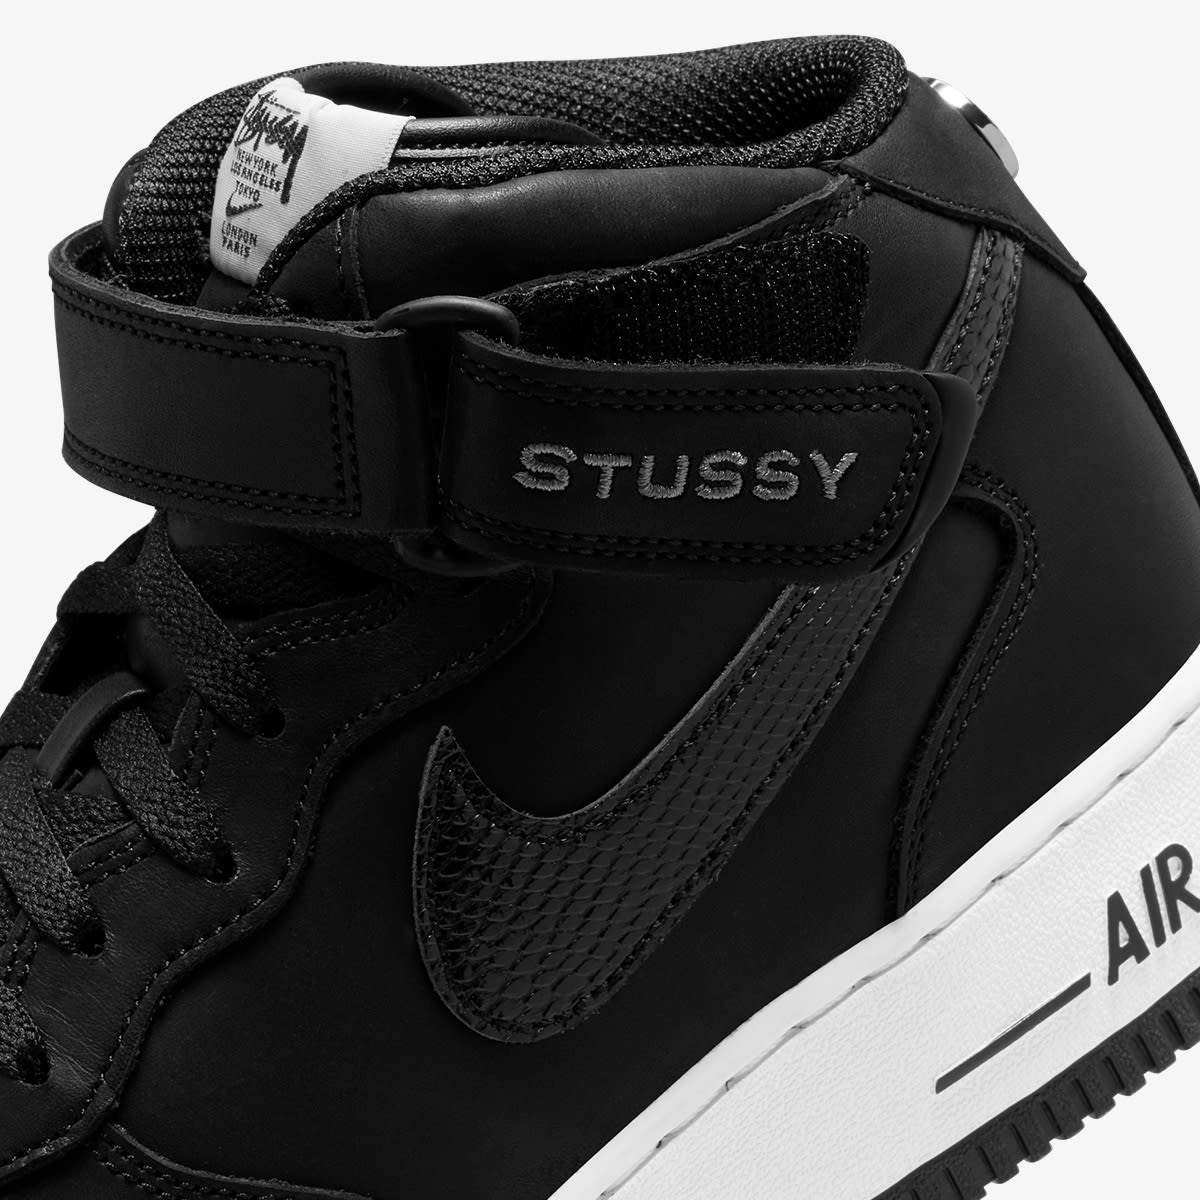 Nike x Stussy Air Force 1 '07 Mid SP (Black) | END. Launches